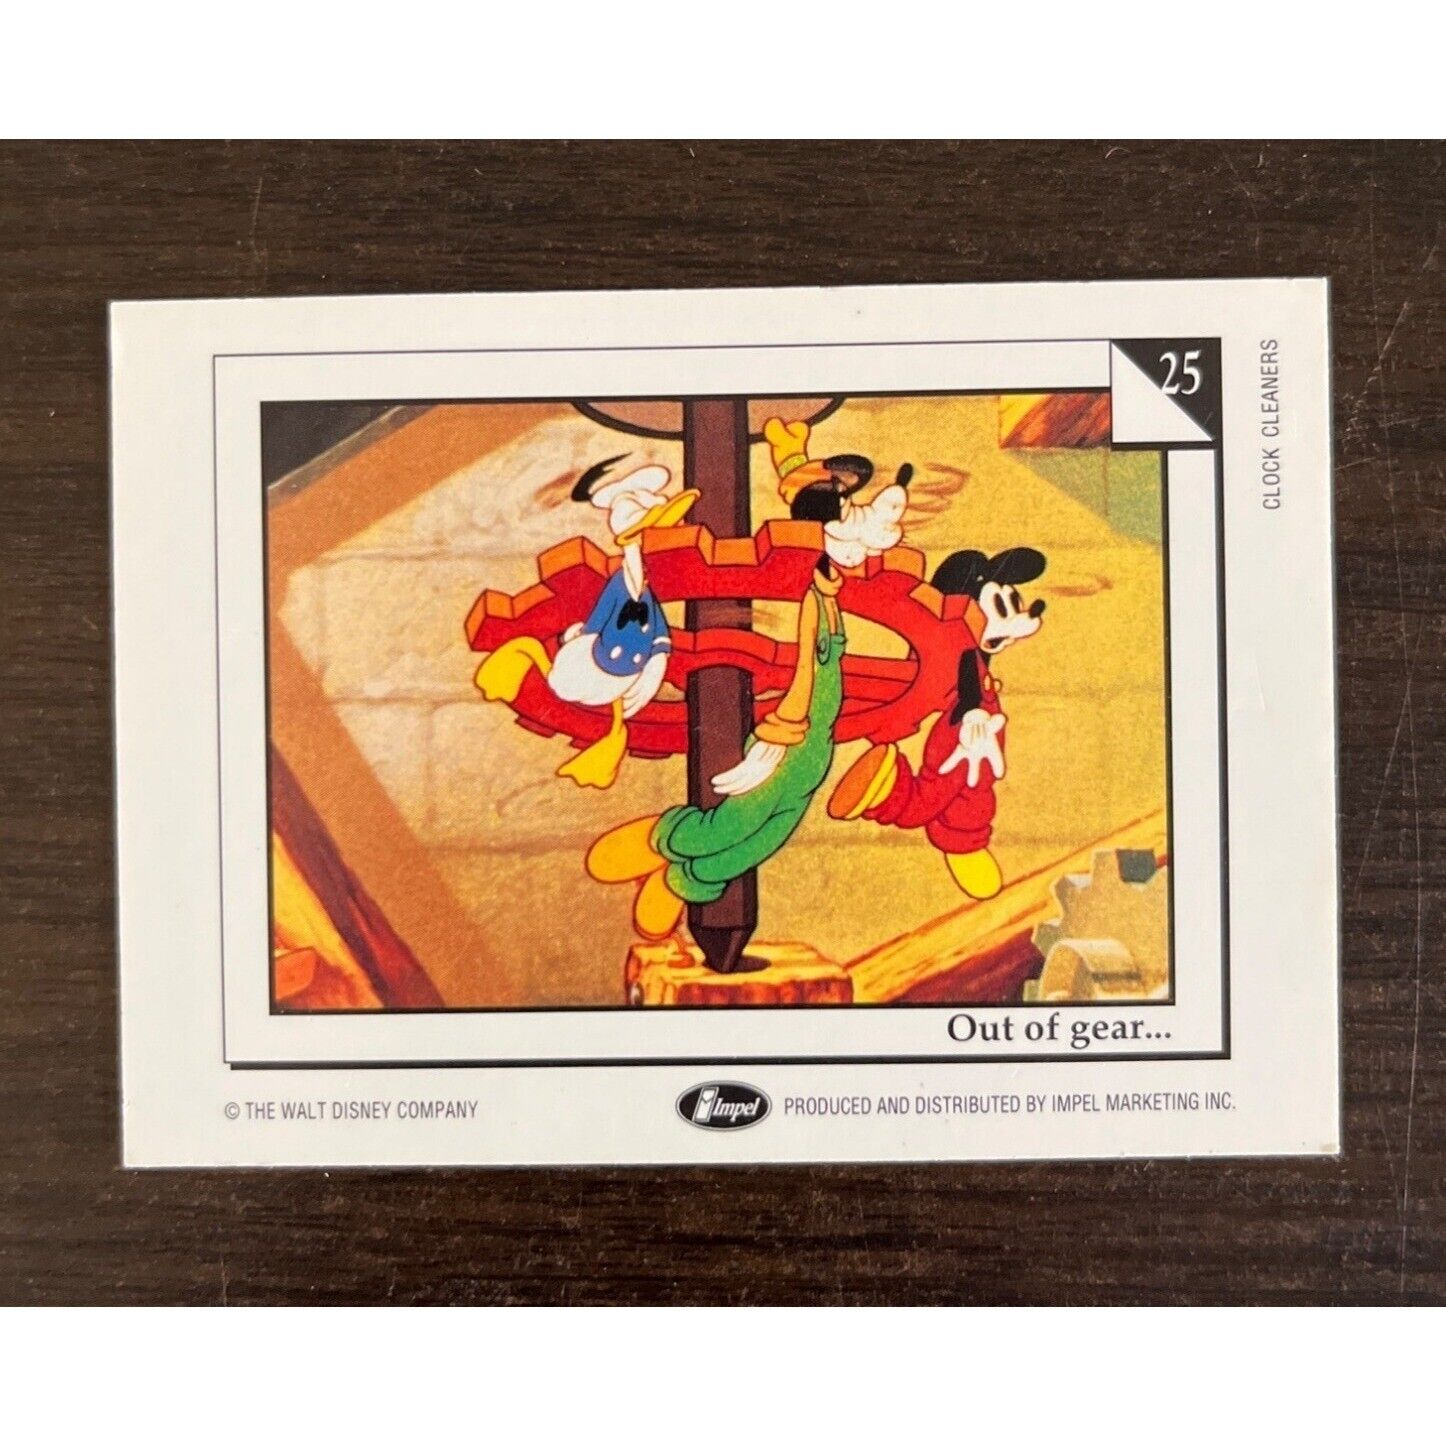 1991 Impel Disney Trading Cards #25 Clock Cleaners Out Of Gear . . .